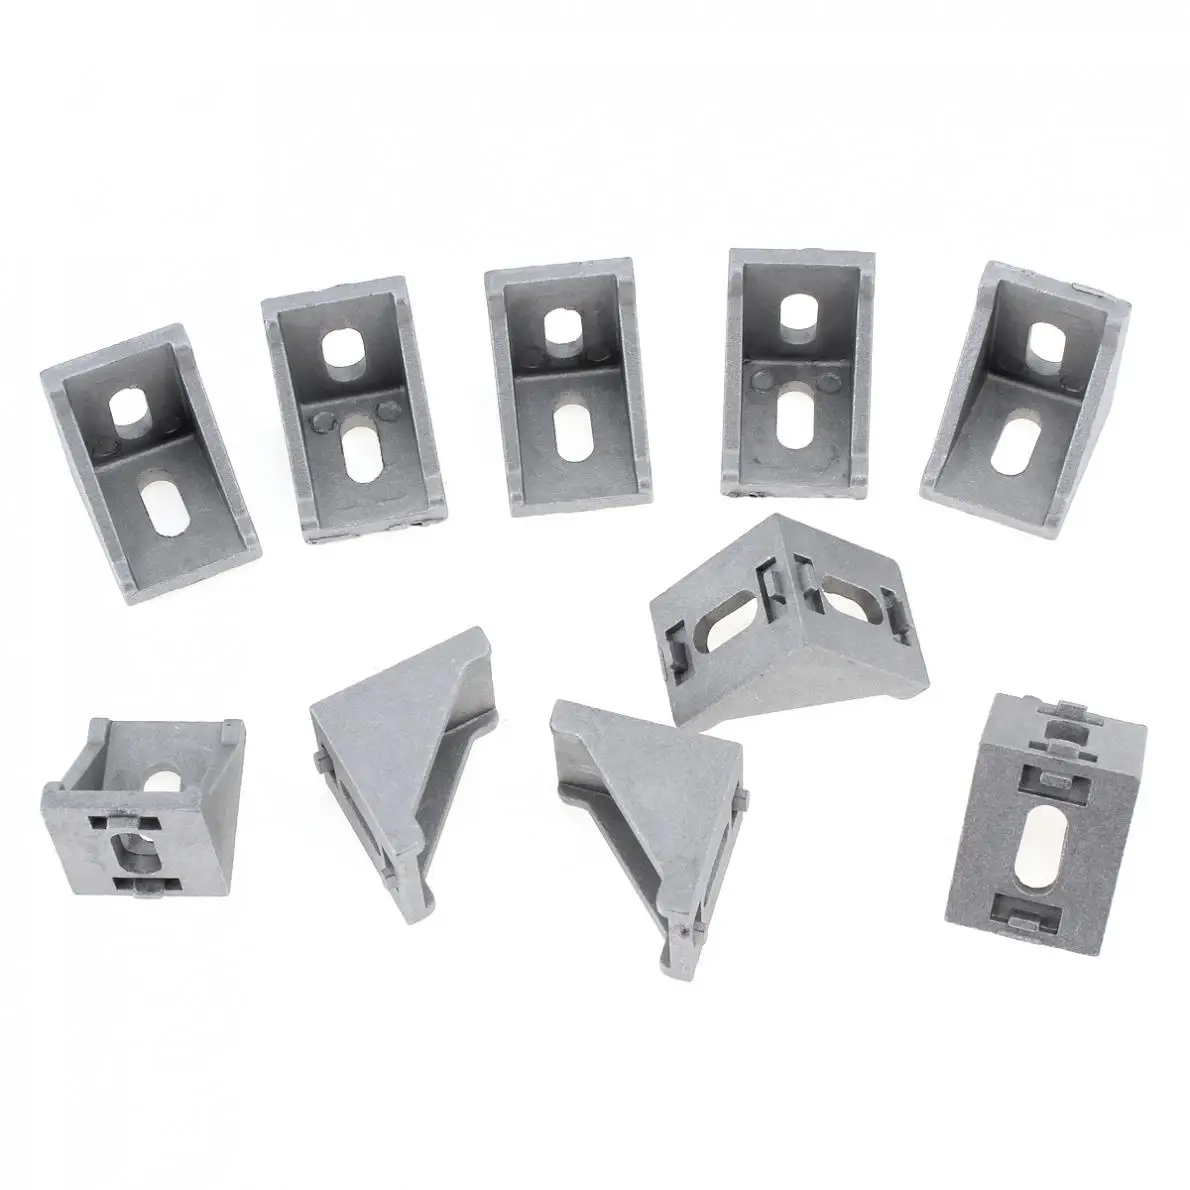 

10pcs/lot 3030 System Aluminium Angle Code Nut Hole Support T-slot 2835 Triangular Frame for Connecting The Flow Profile